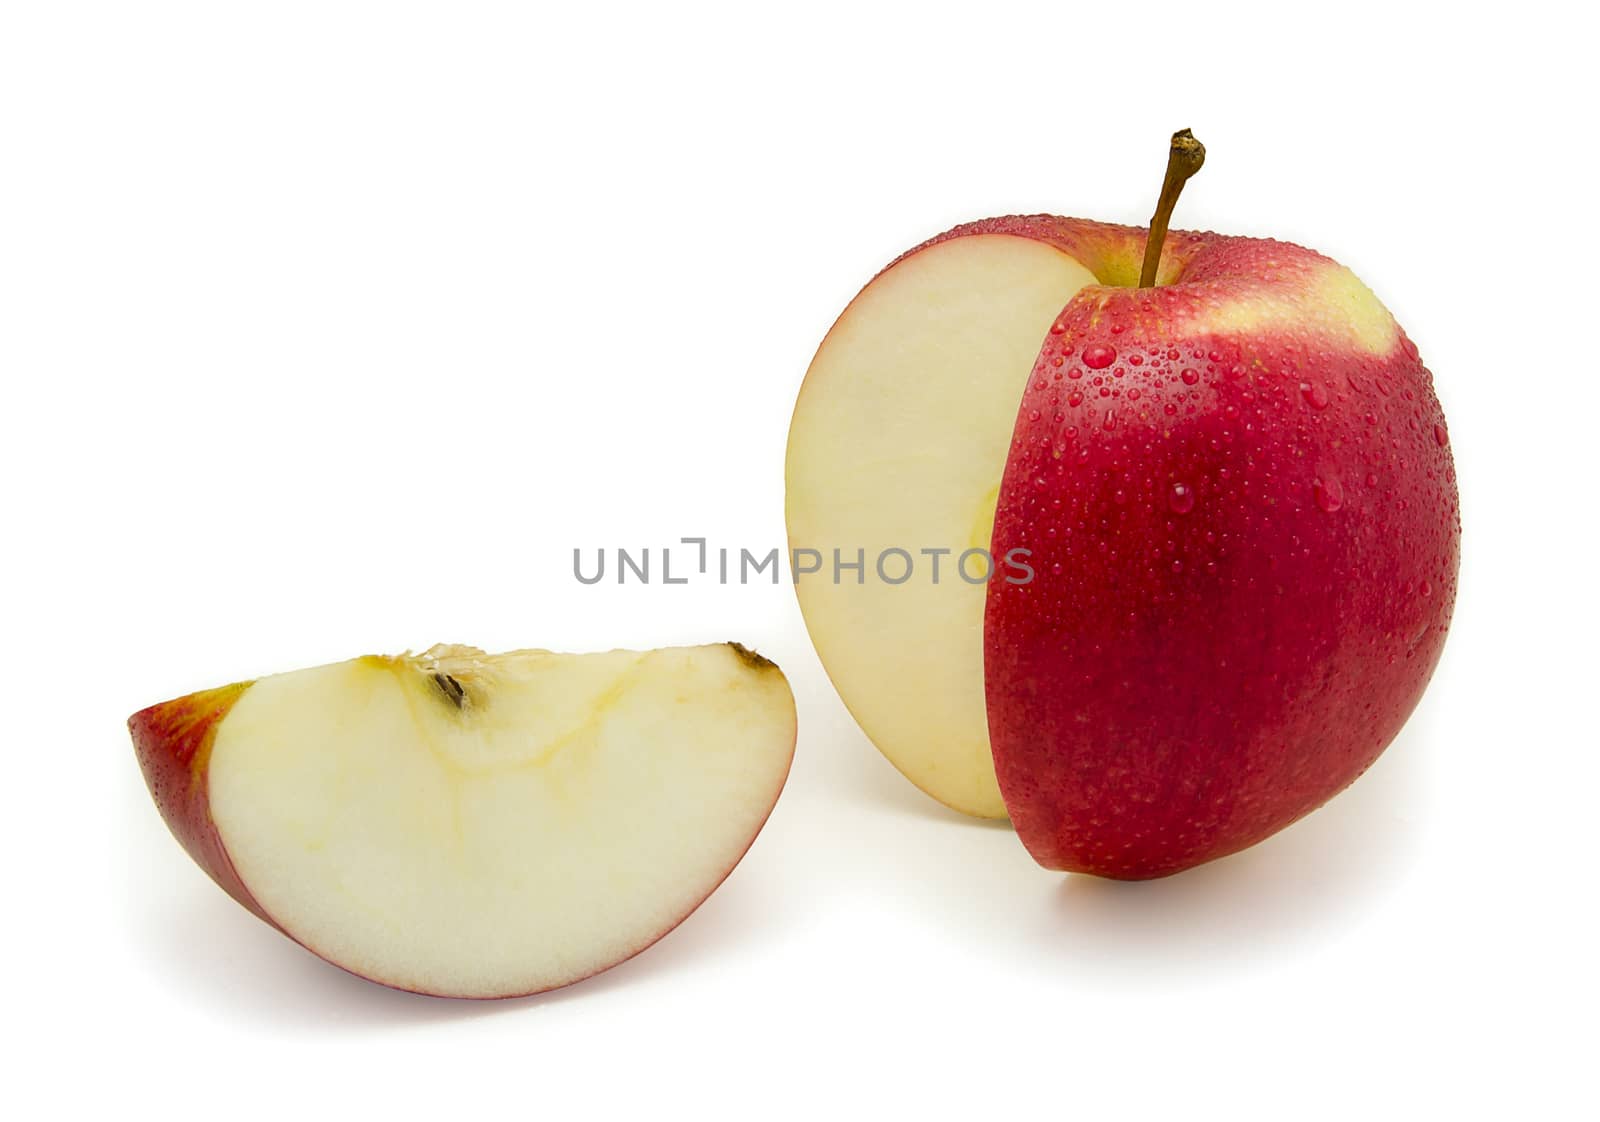 Red apple sliced. Isolated on white background
